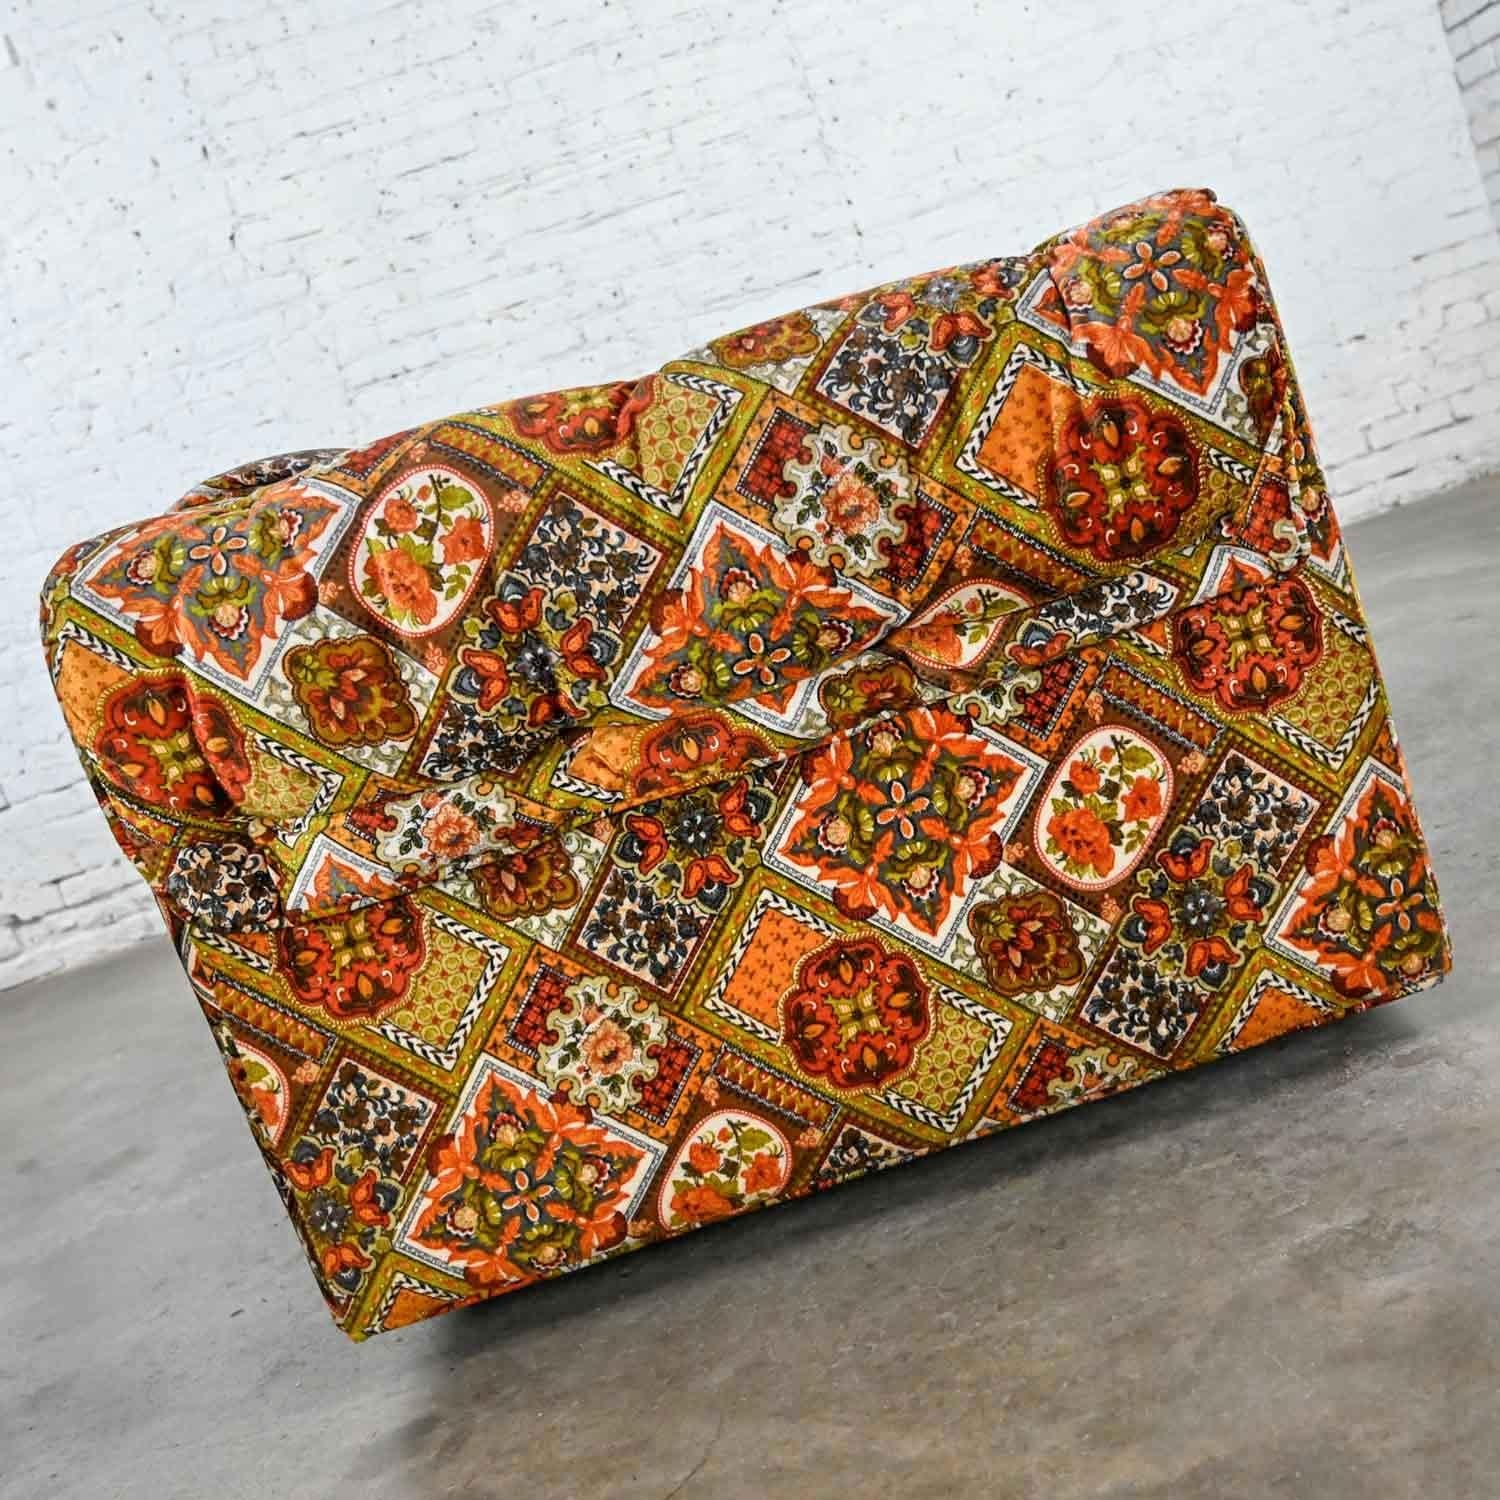 Fabric Orange Gold Geometric Floral Patchwork Modern Tuxedo Style Love Seat by Maddox 